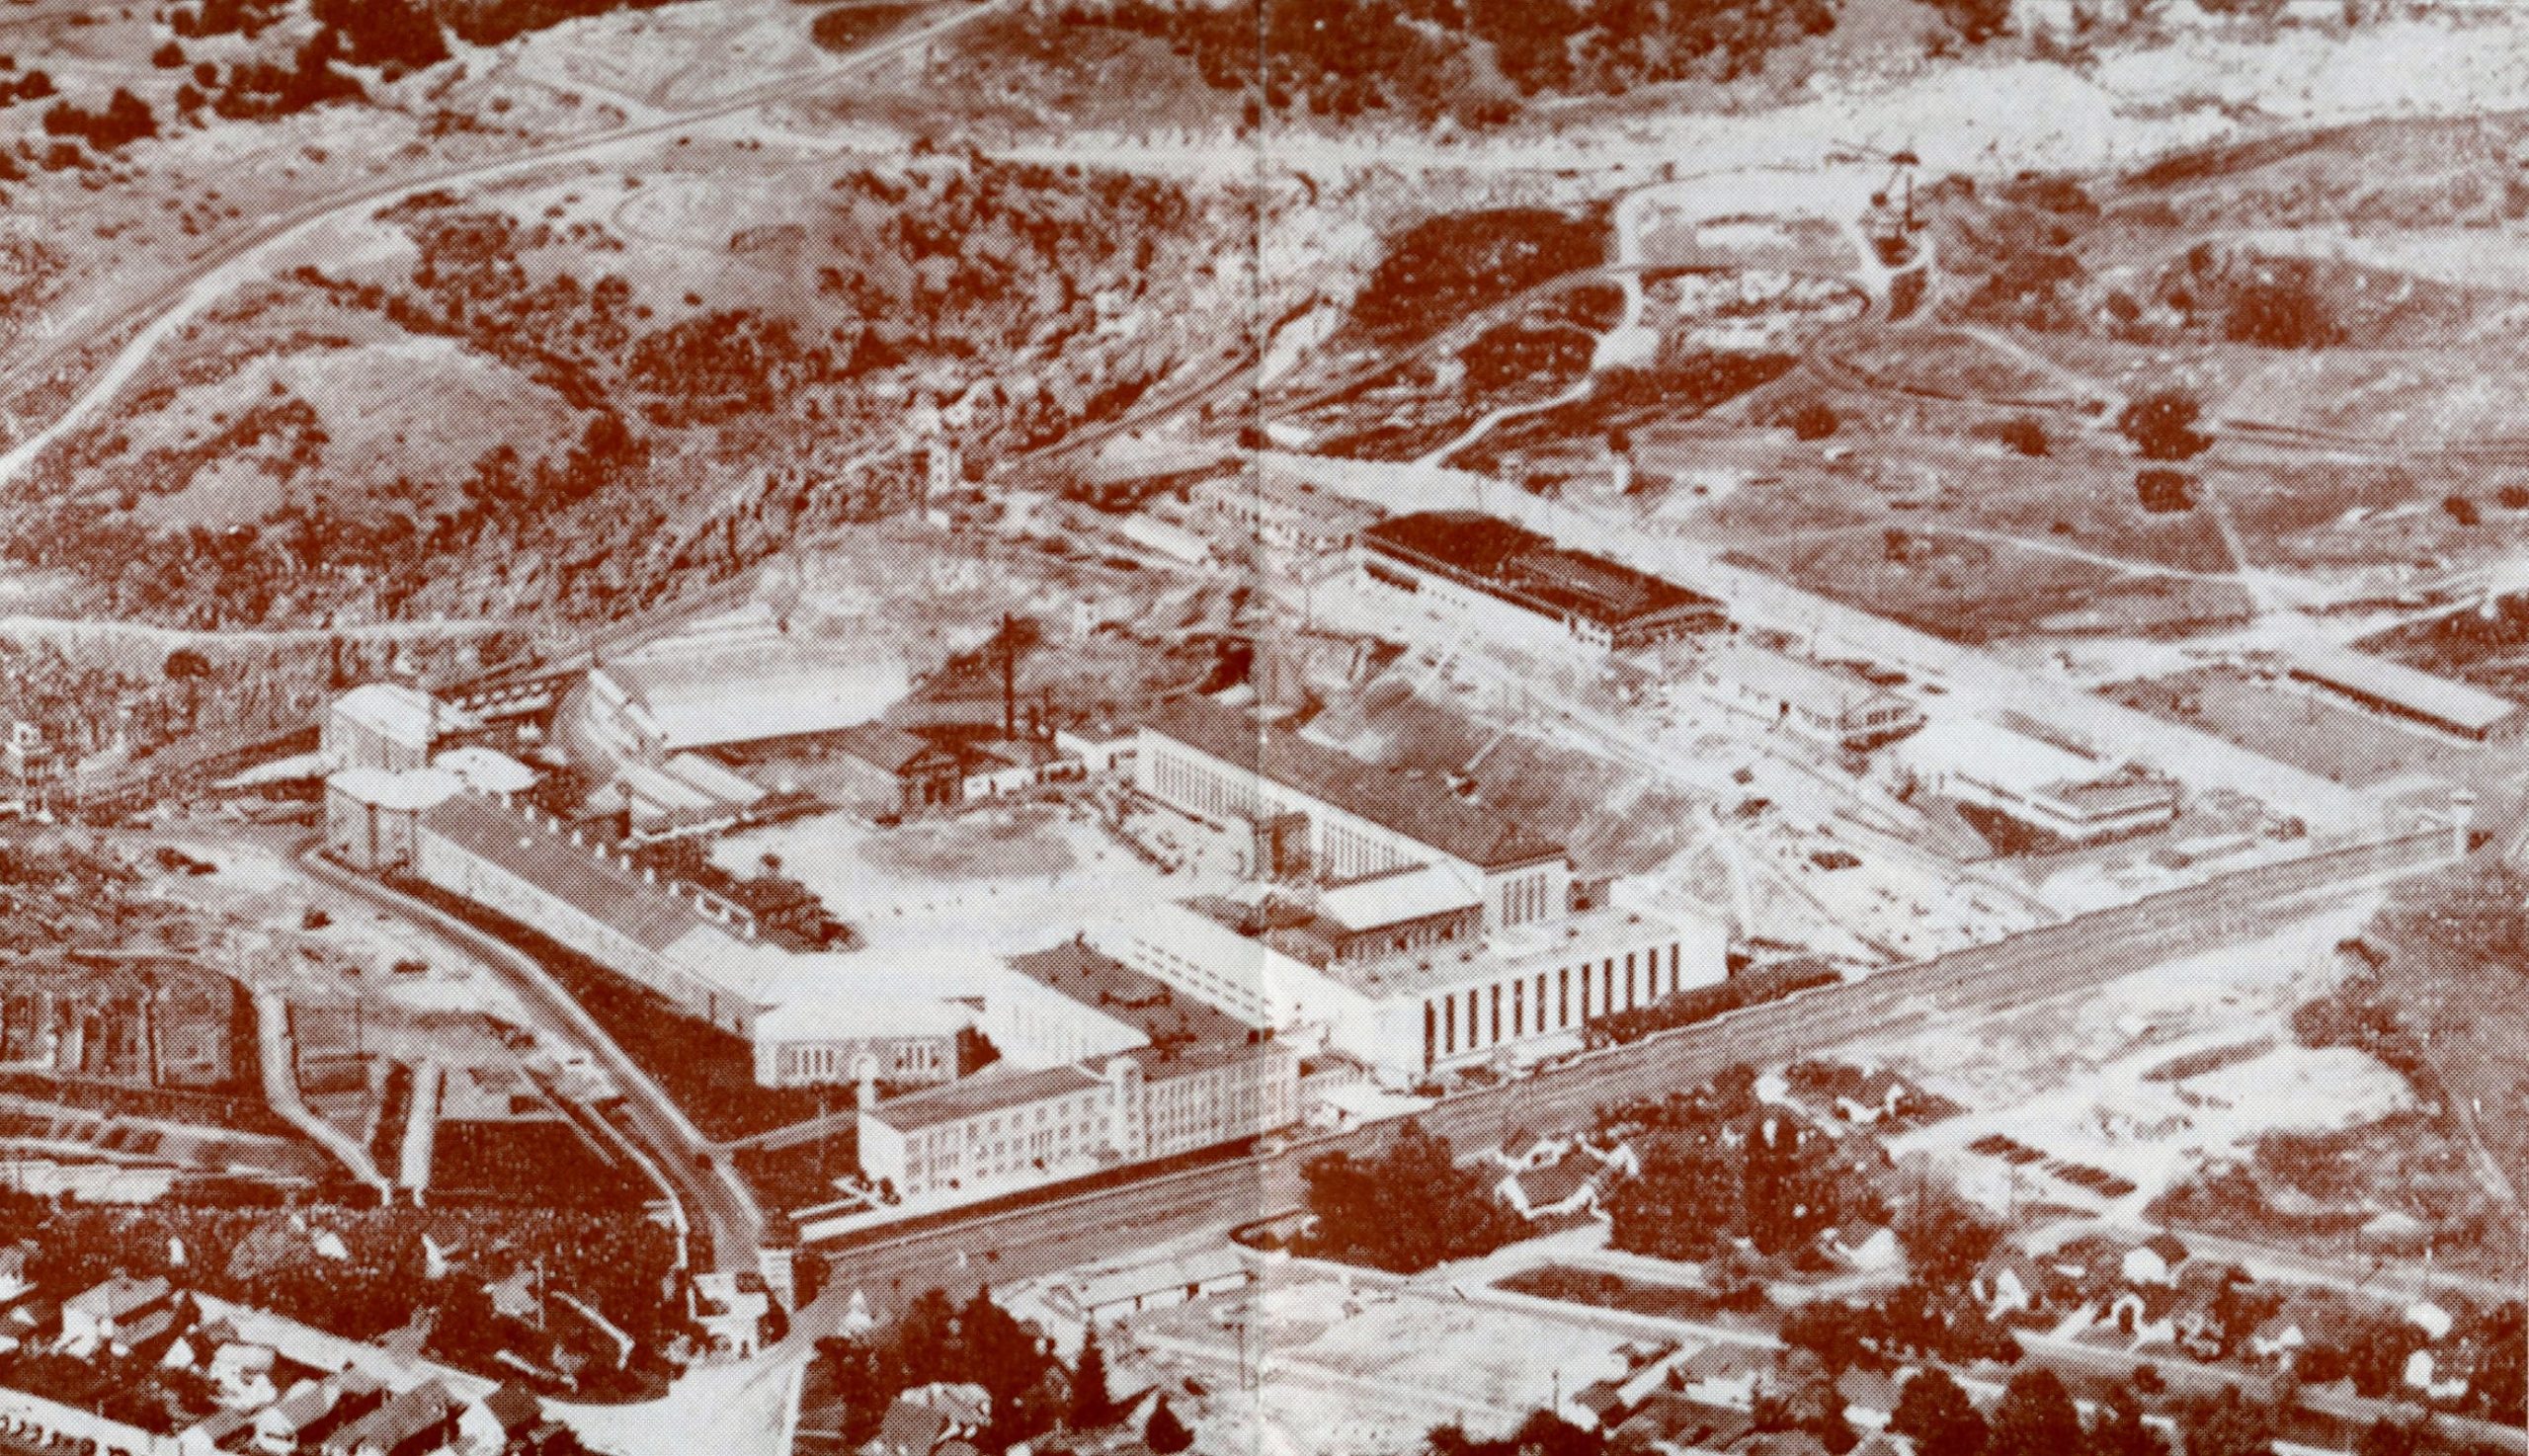 Overview photo of Folsom Prison's buildings and walls.